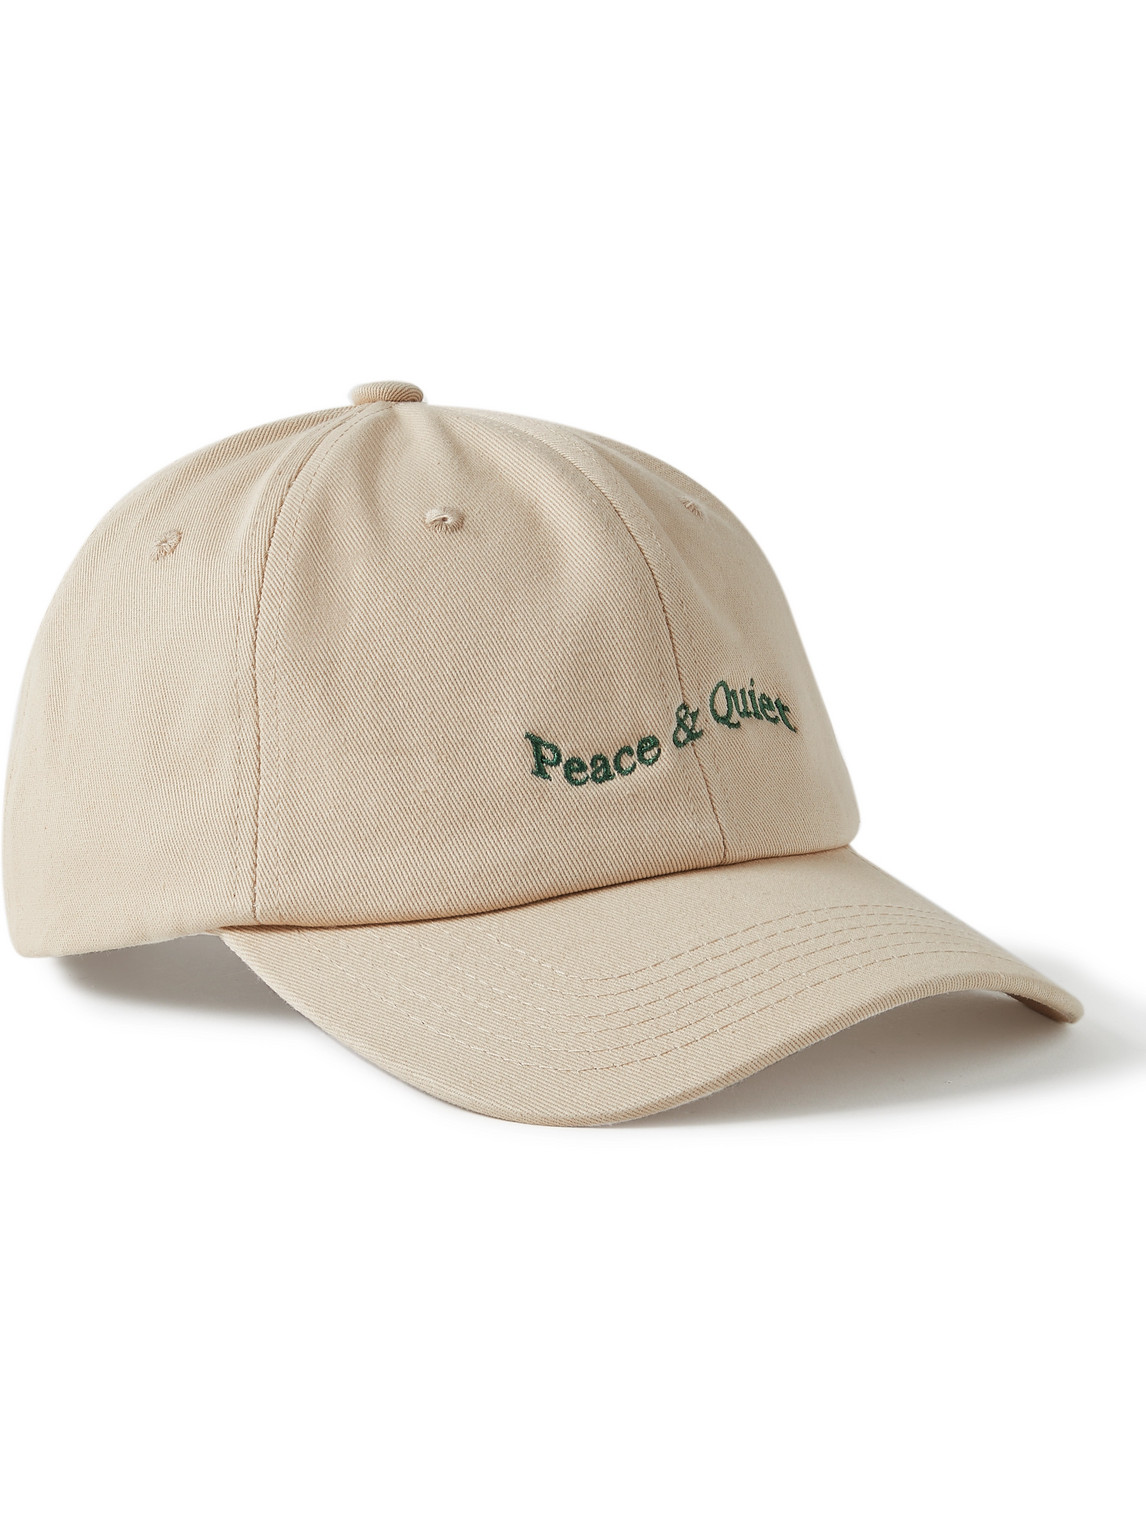 Museum Of Peace & Quiet Wordmark Logo-Embroidered Cotton-Twill Baseball Cap